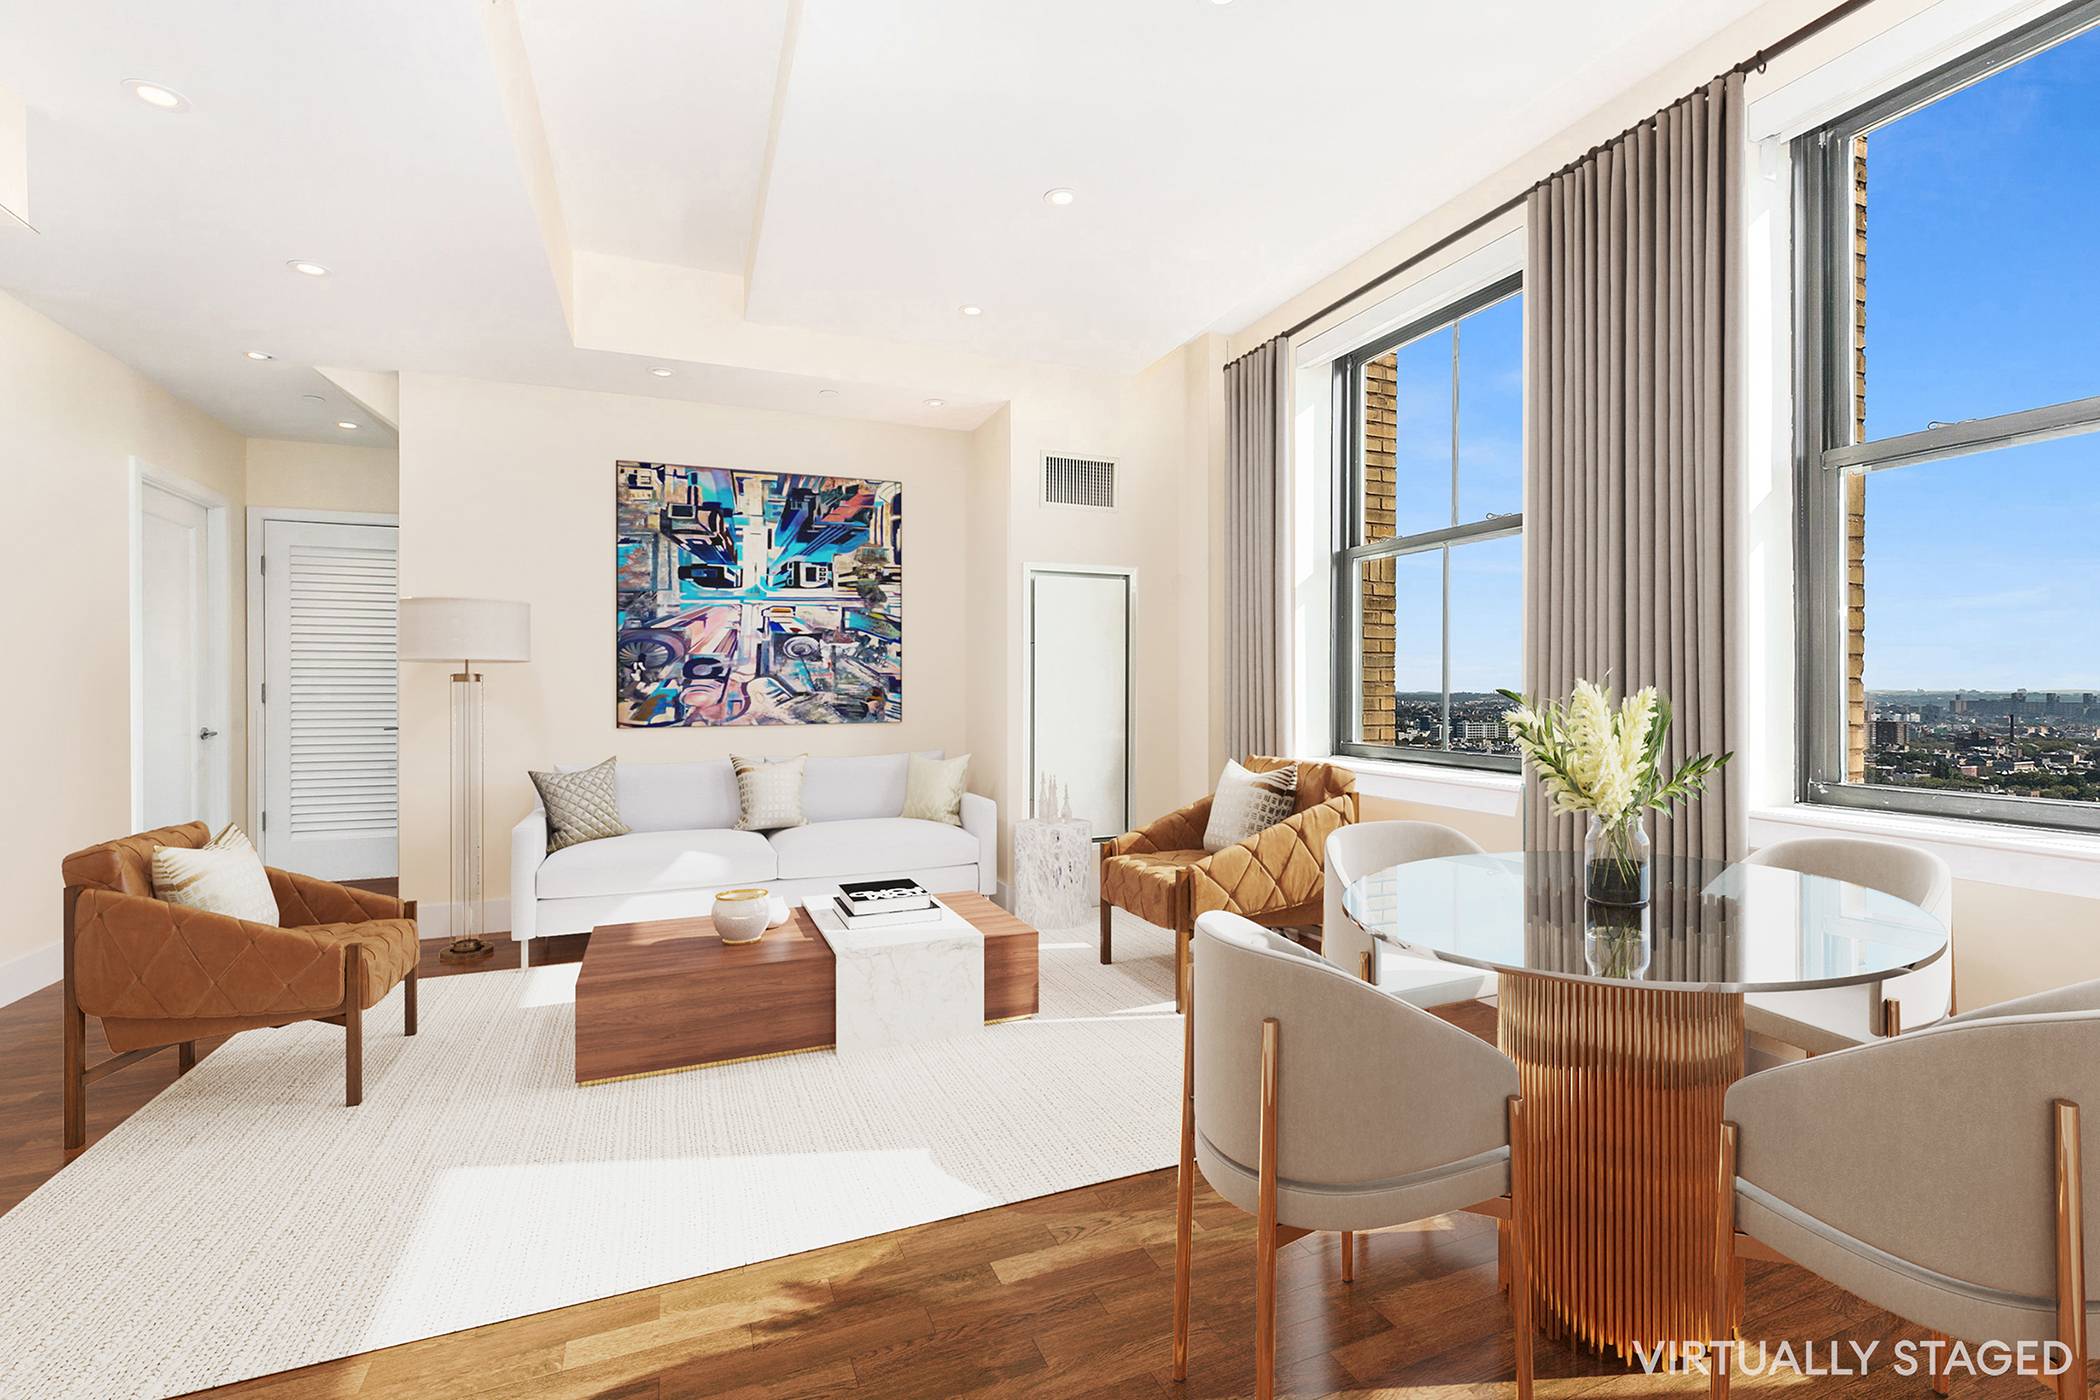 Apartment 25B at One Hanson Place is a fabulous split layout two bedroom, two bathroom condominium with spectacular views in Fort Greene's coveted former Williamsburg Savings Bank building.